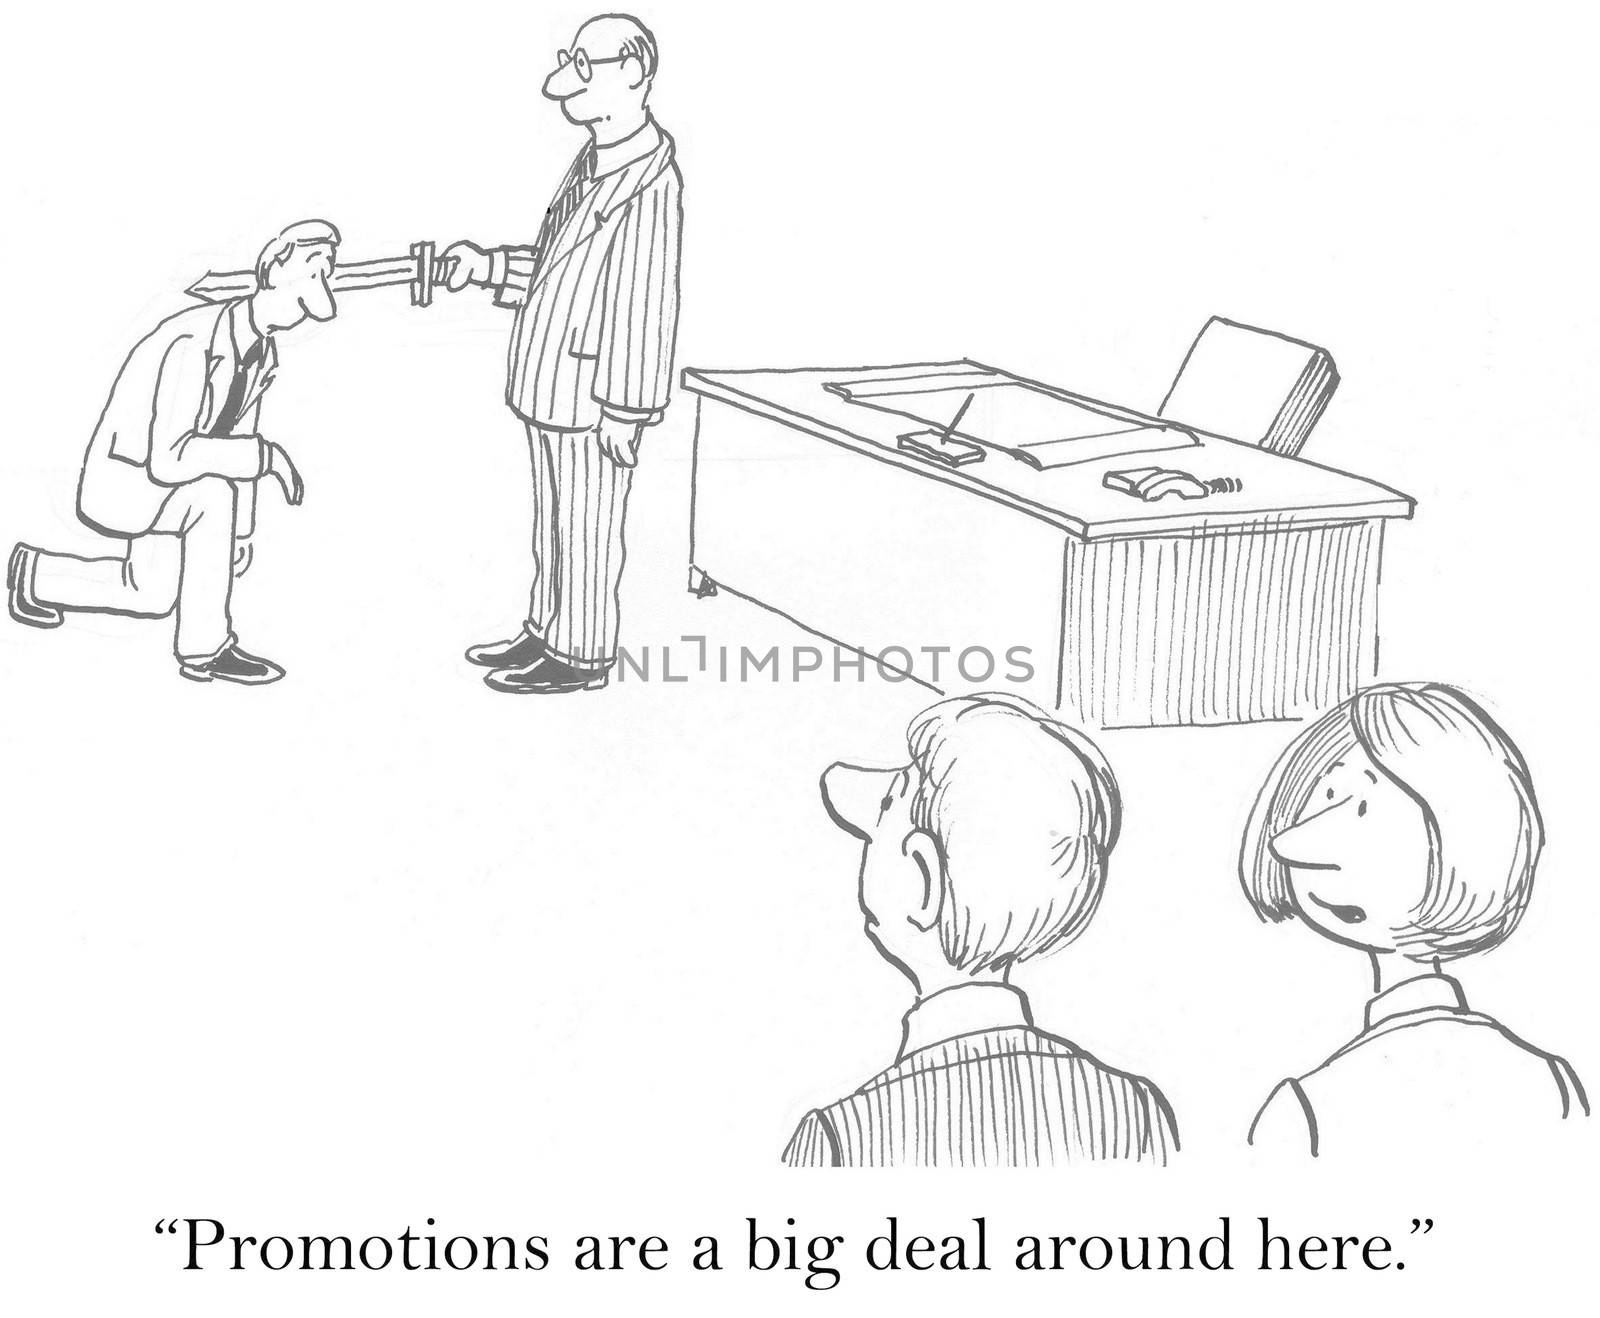 "Promotions are a big deal around here."